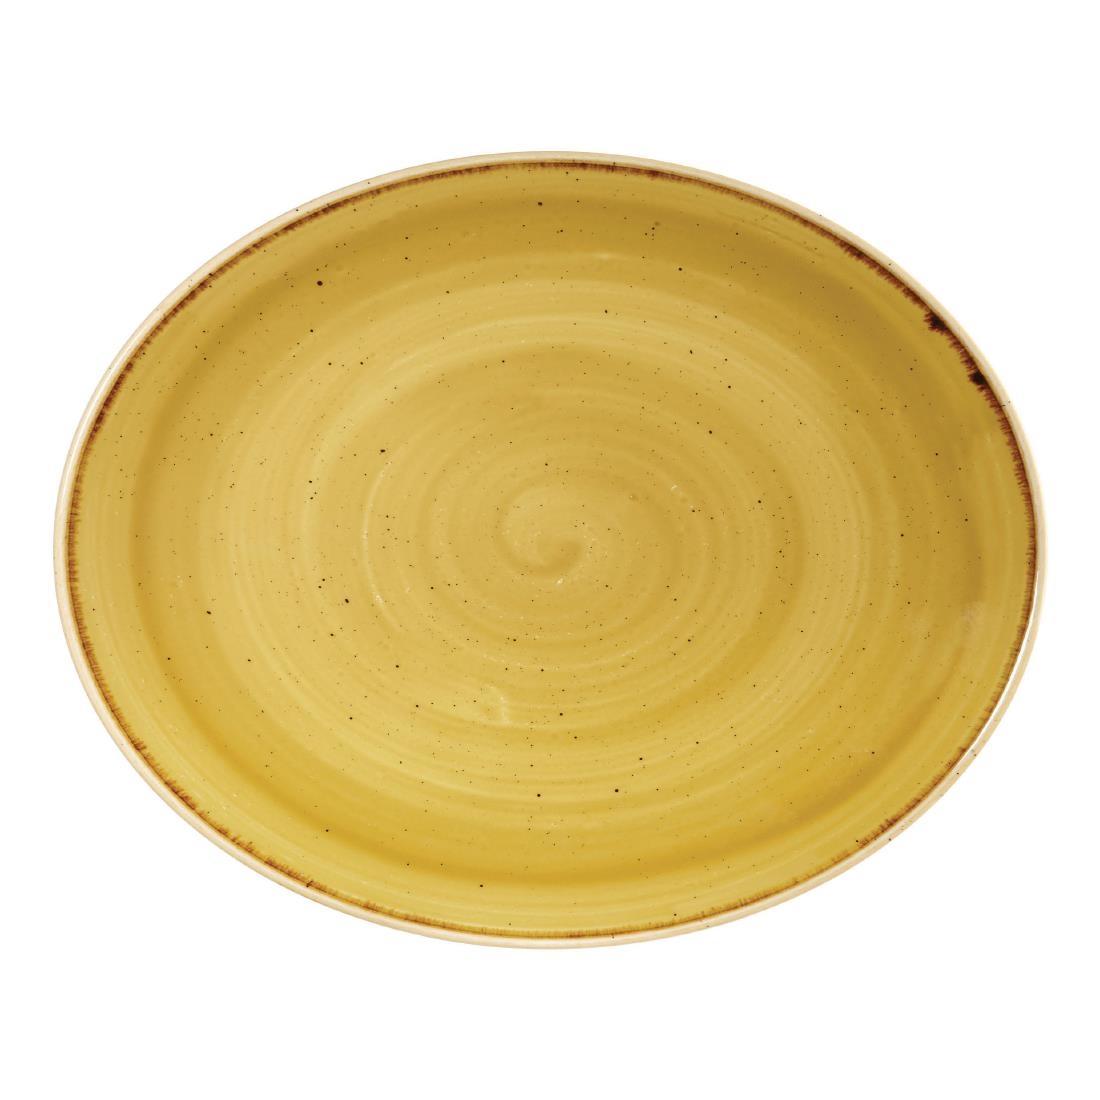 Churchill Stonecast Oval Coupe Plate Mustard Seed Yellow 192mm (Pack of 12) - CN314  - 1